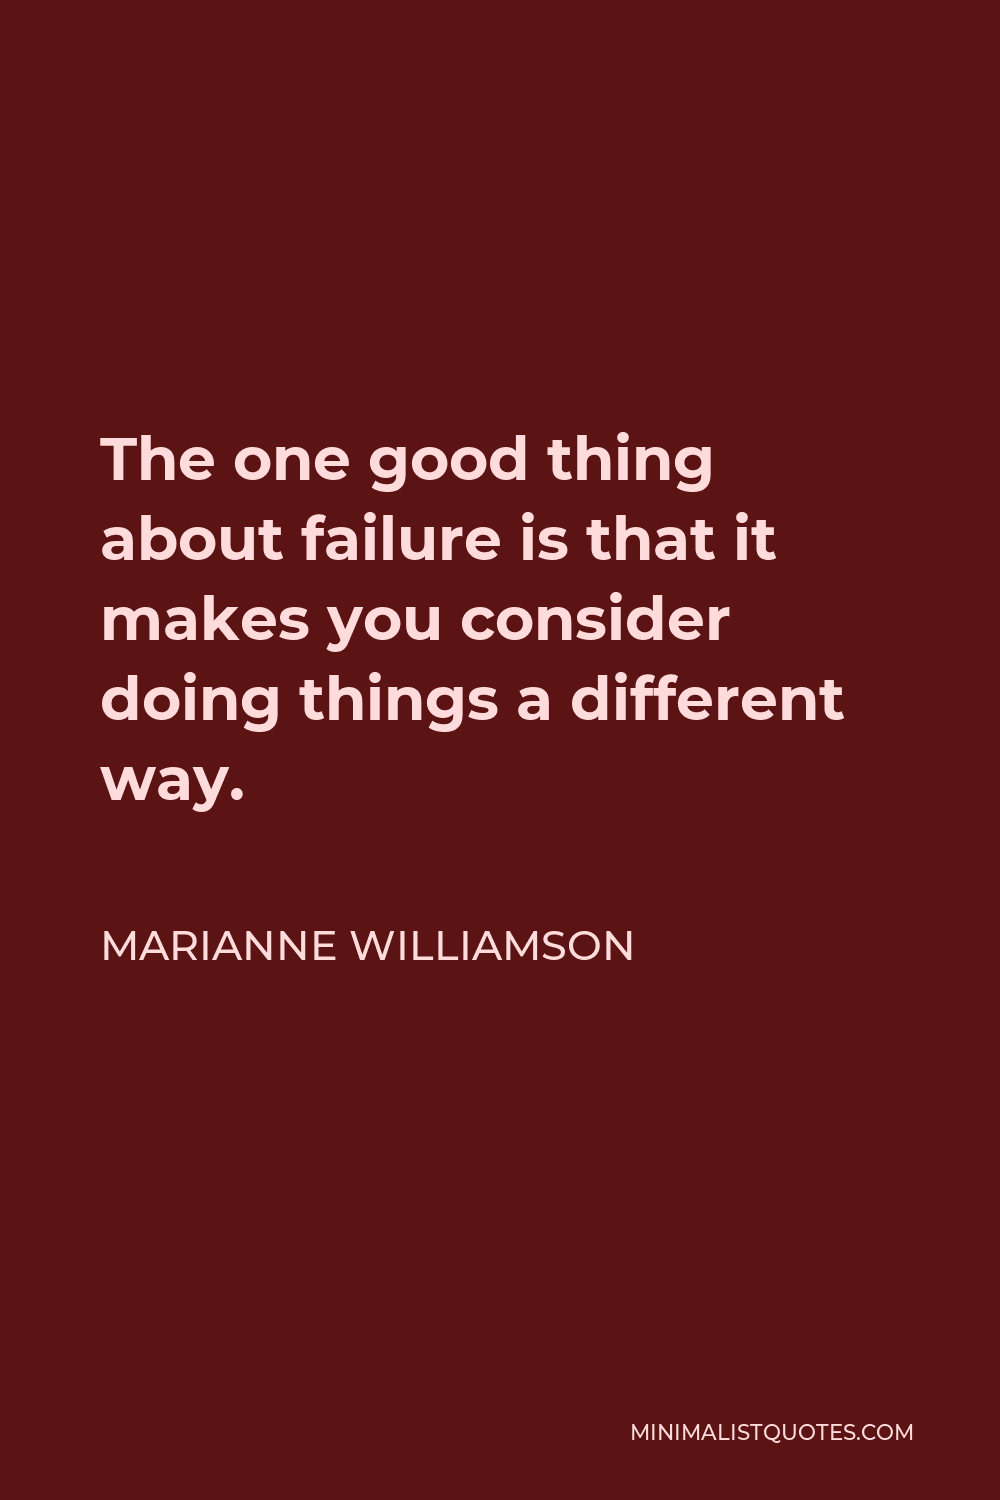 Marianne Williamson Quote - The one good thing about failure is that it makes you consider doing things a different way.